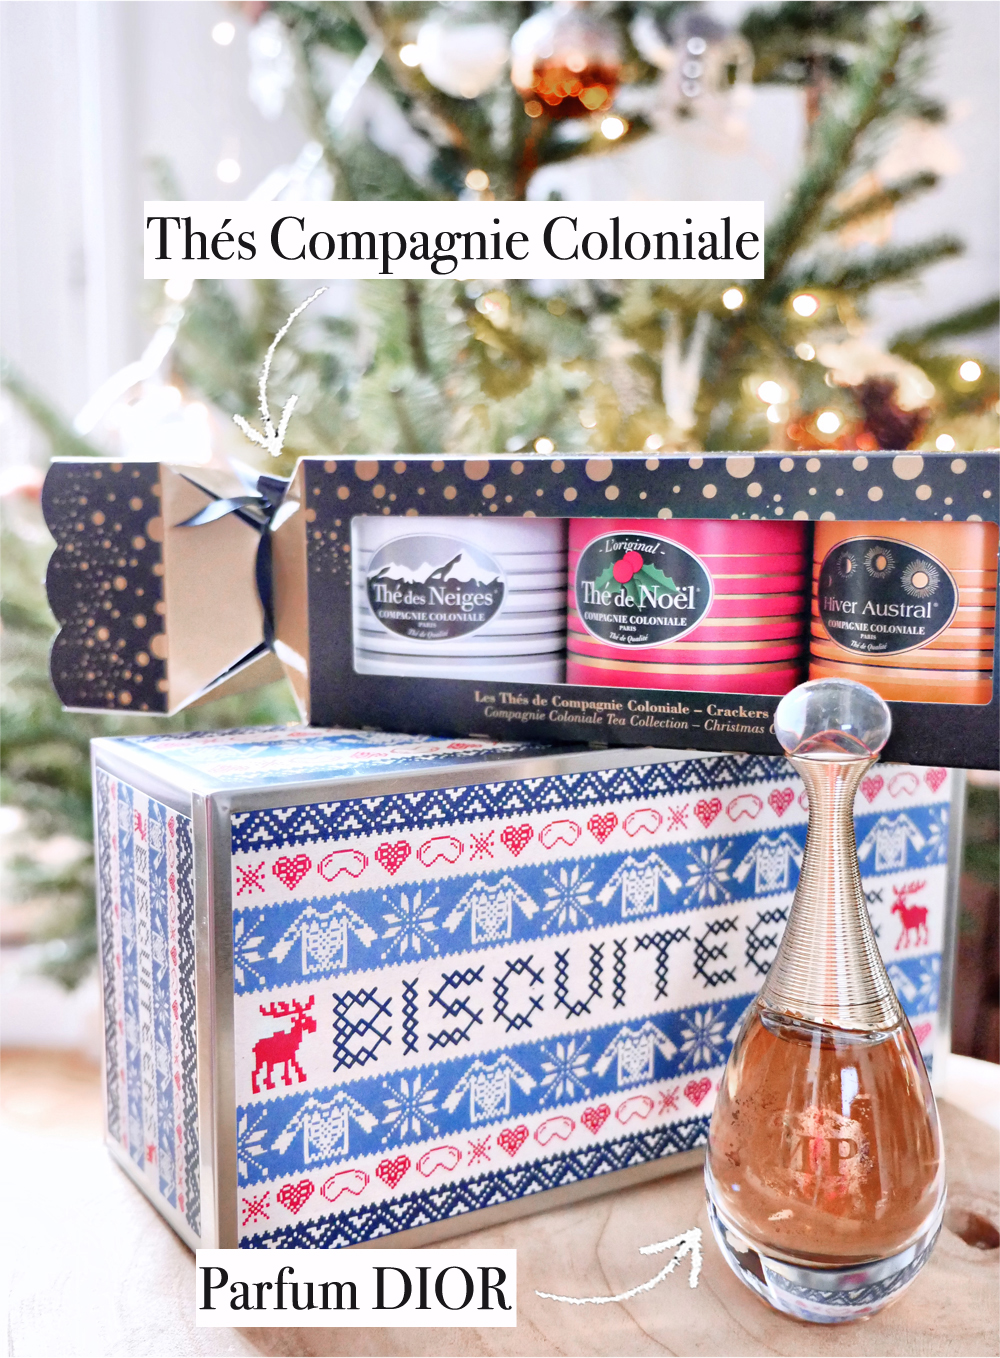 THE-compagnie-coloniale-1